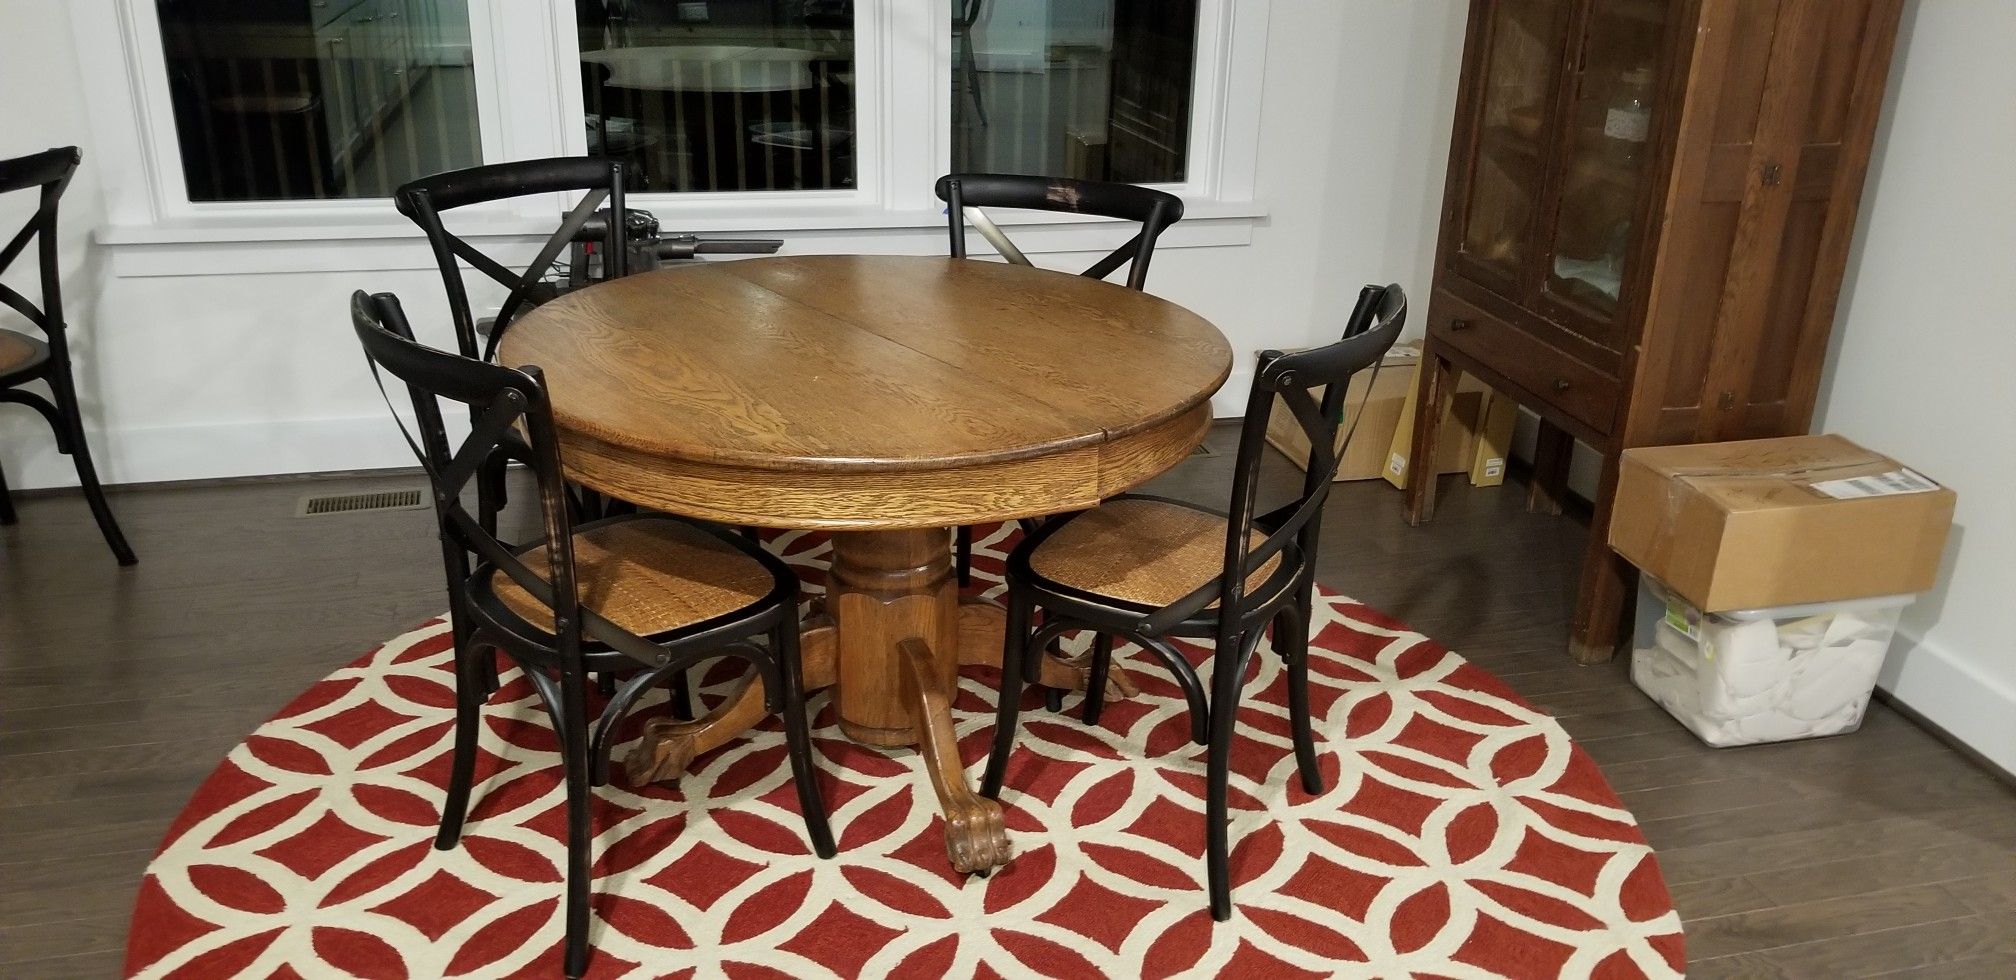 Clawfoot dining table (no chairs)